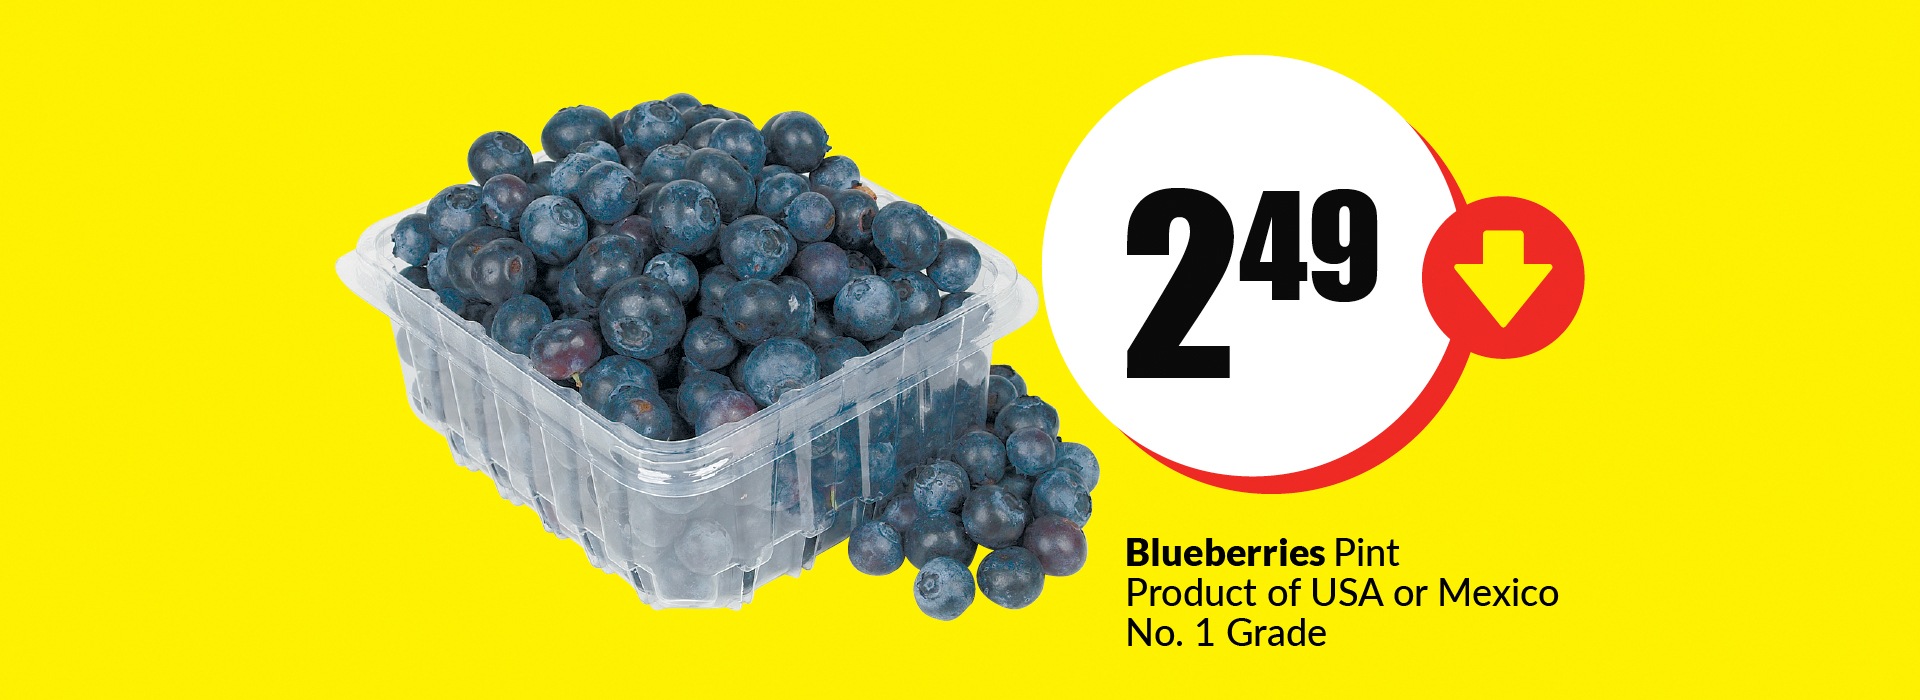 The following image contains the text,"Â Blueberries pint product of the USA or Mexico No. 1 Grade. Get them at $2.49."